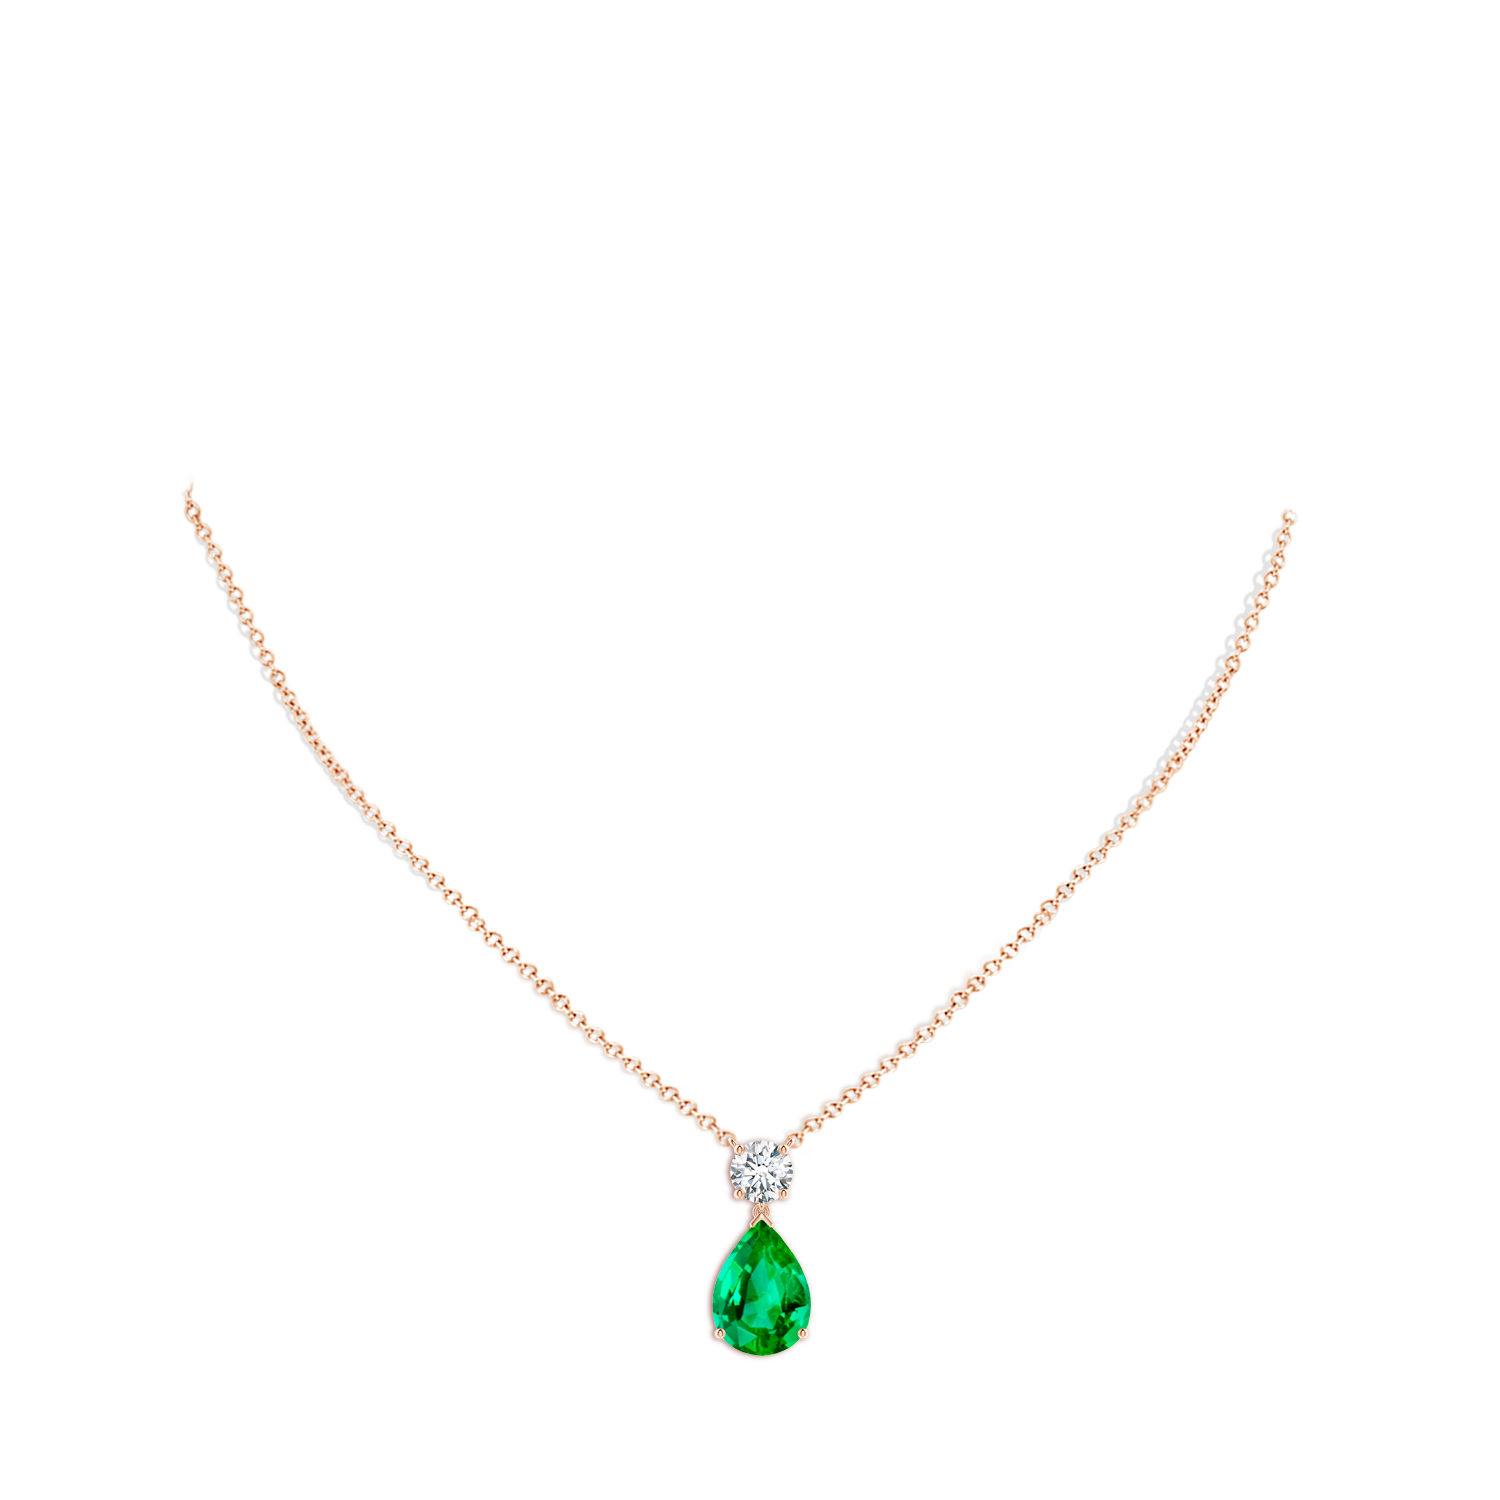 AAA - Emerald / 7.6 CT / 18 KT Rose Gold